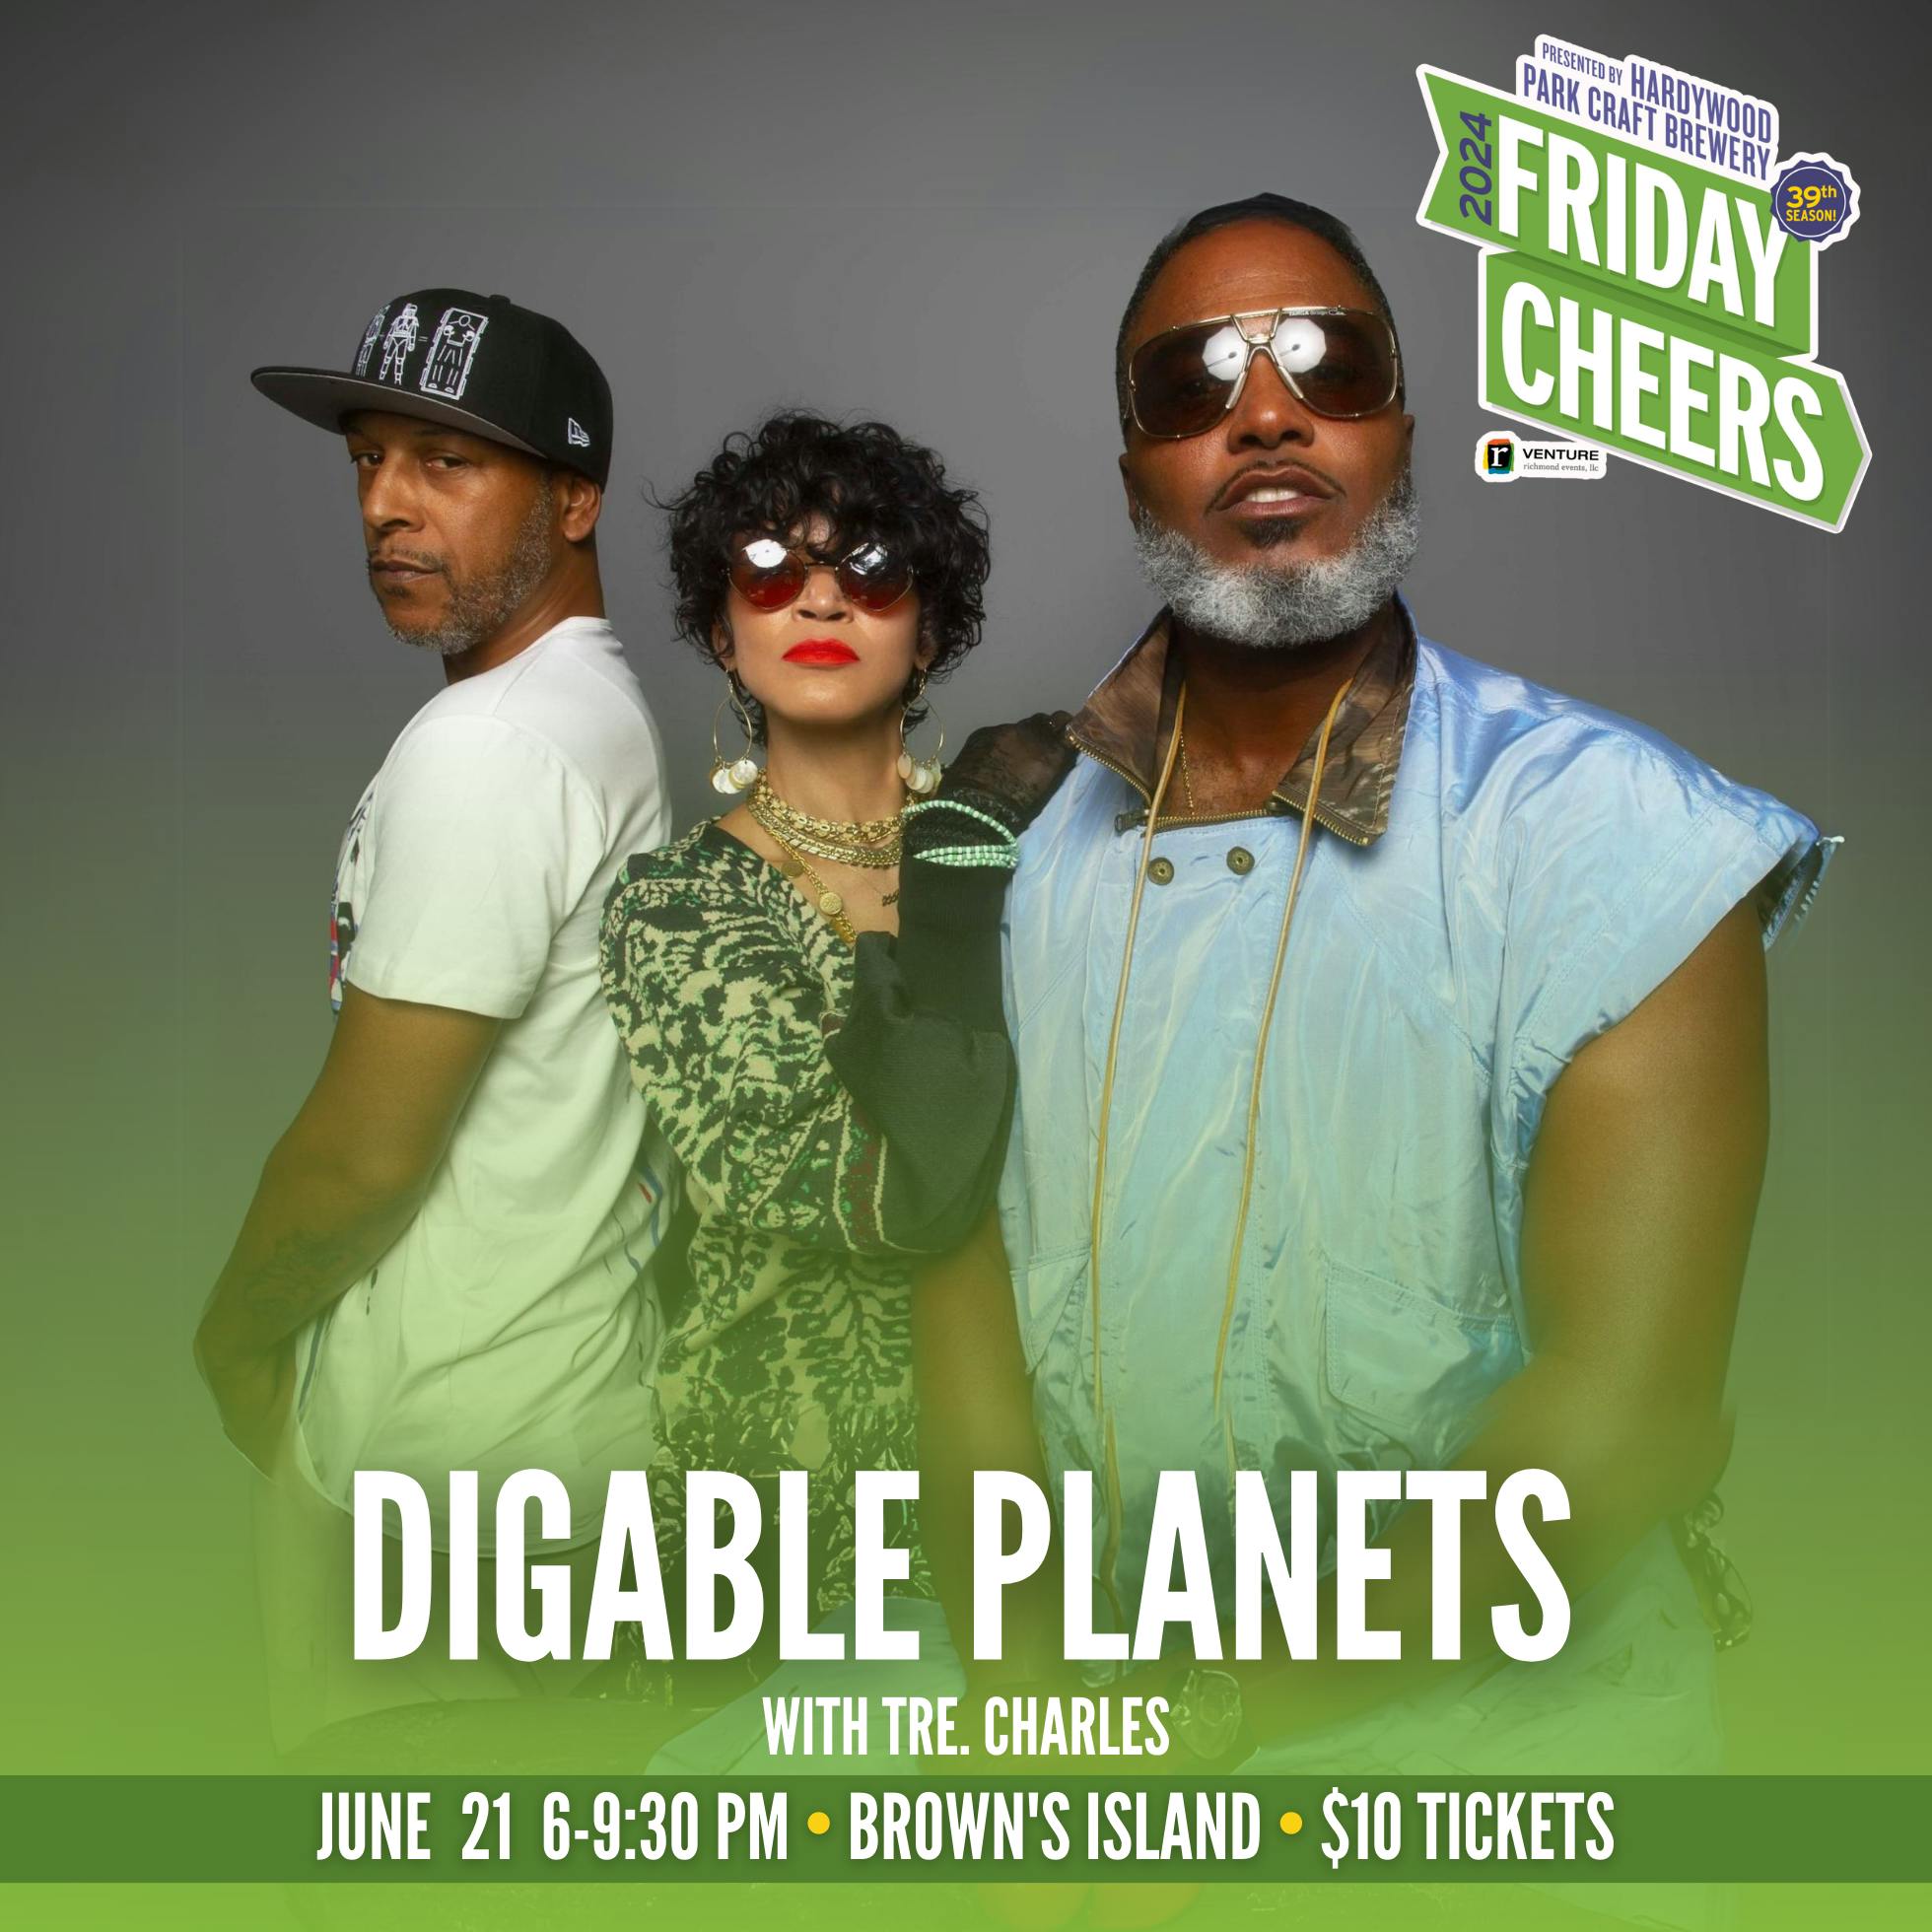 Digable Planets with Tre. Charles